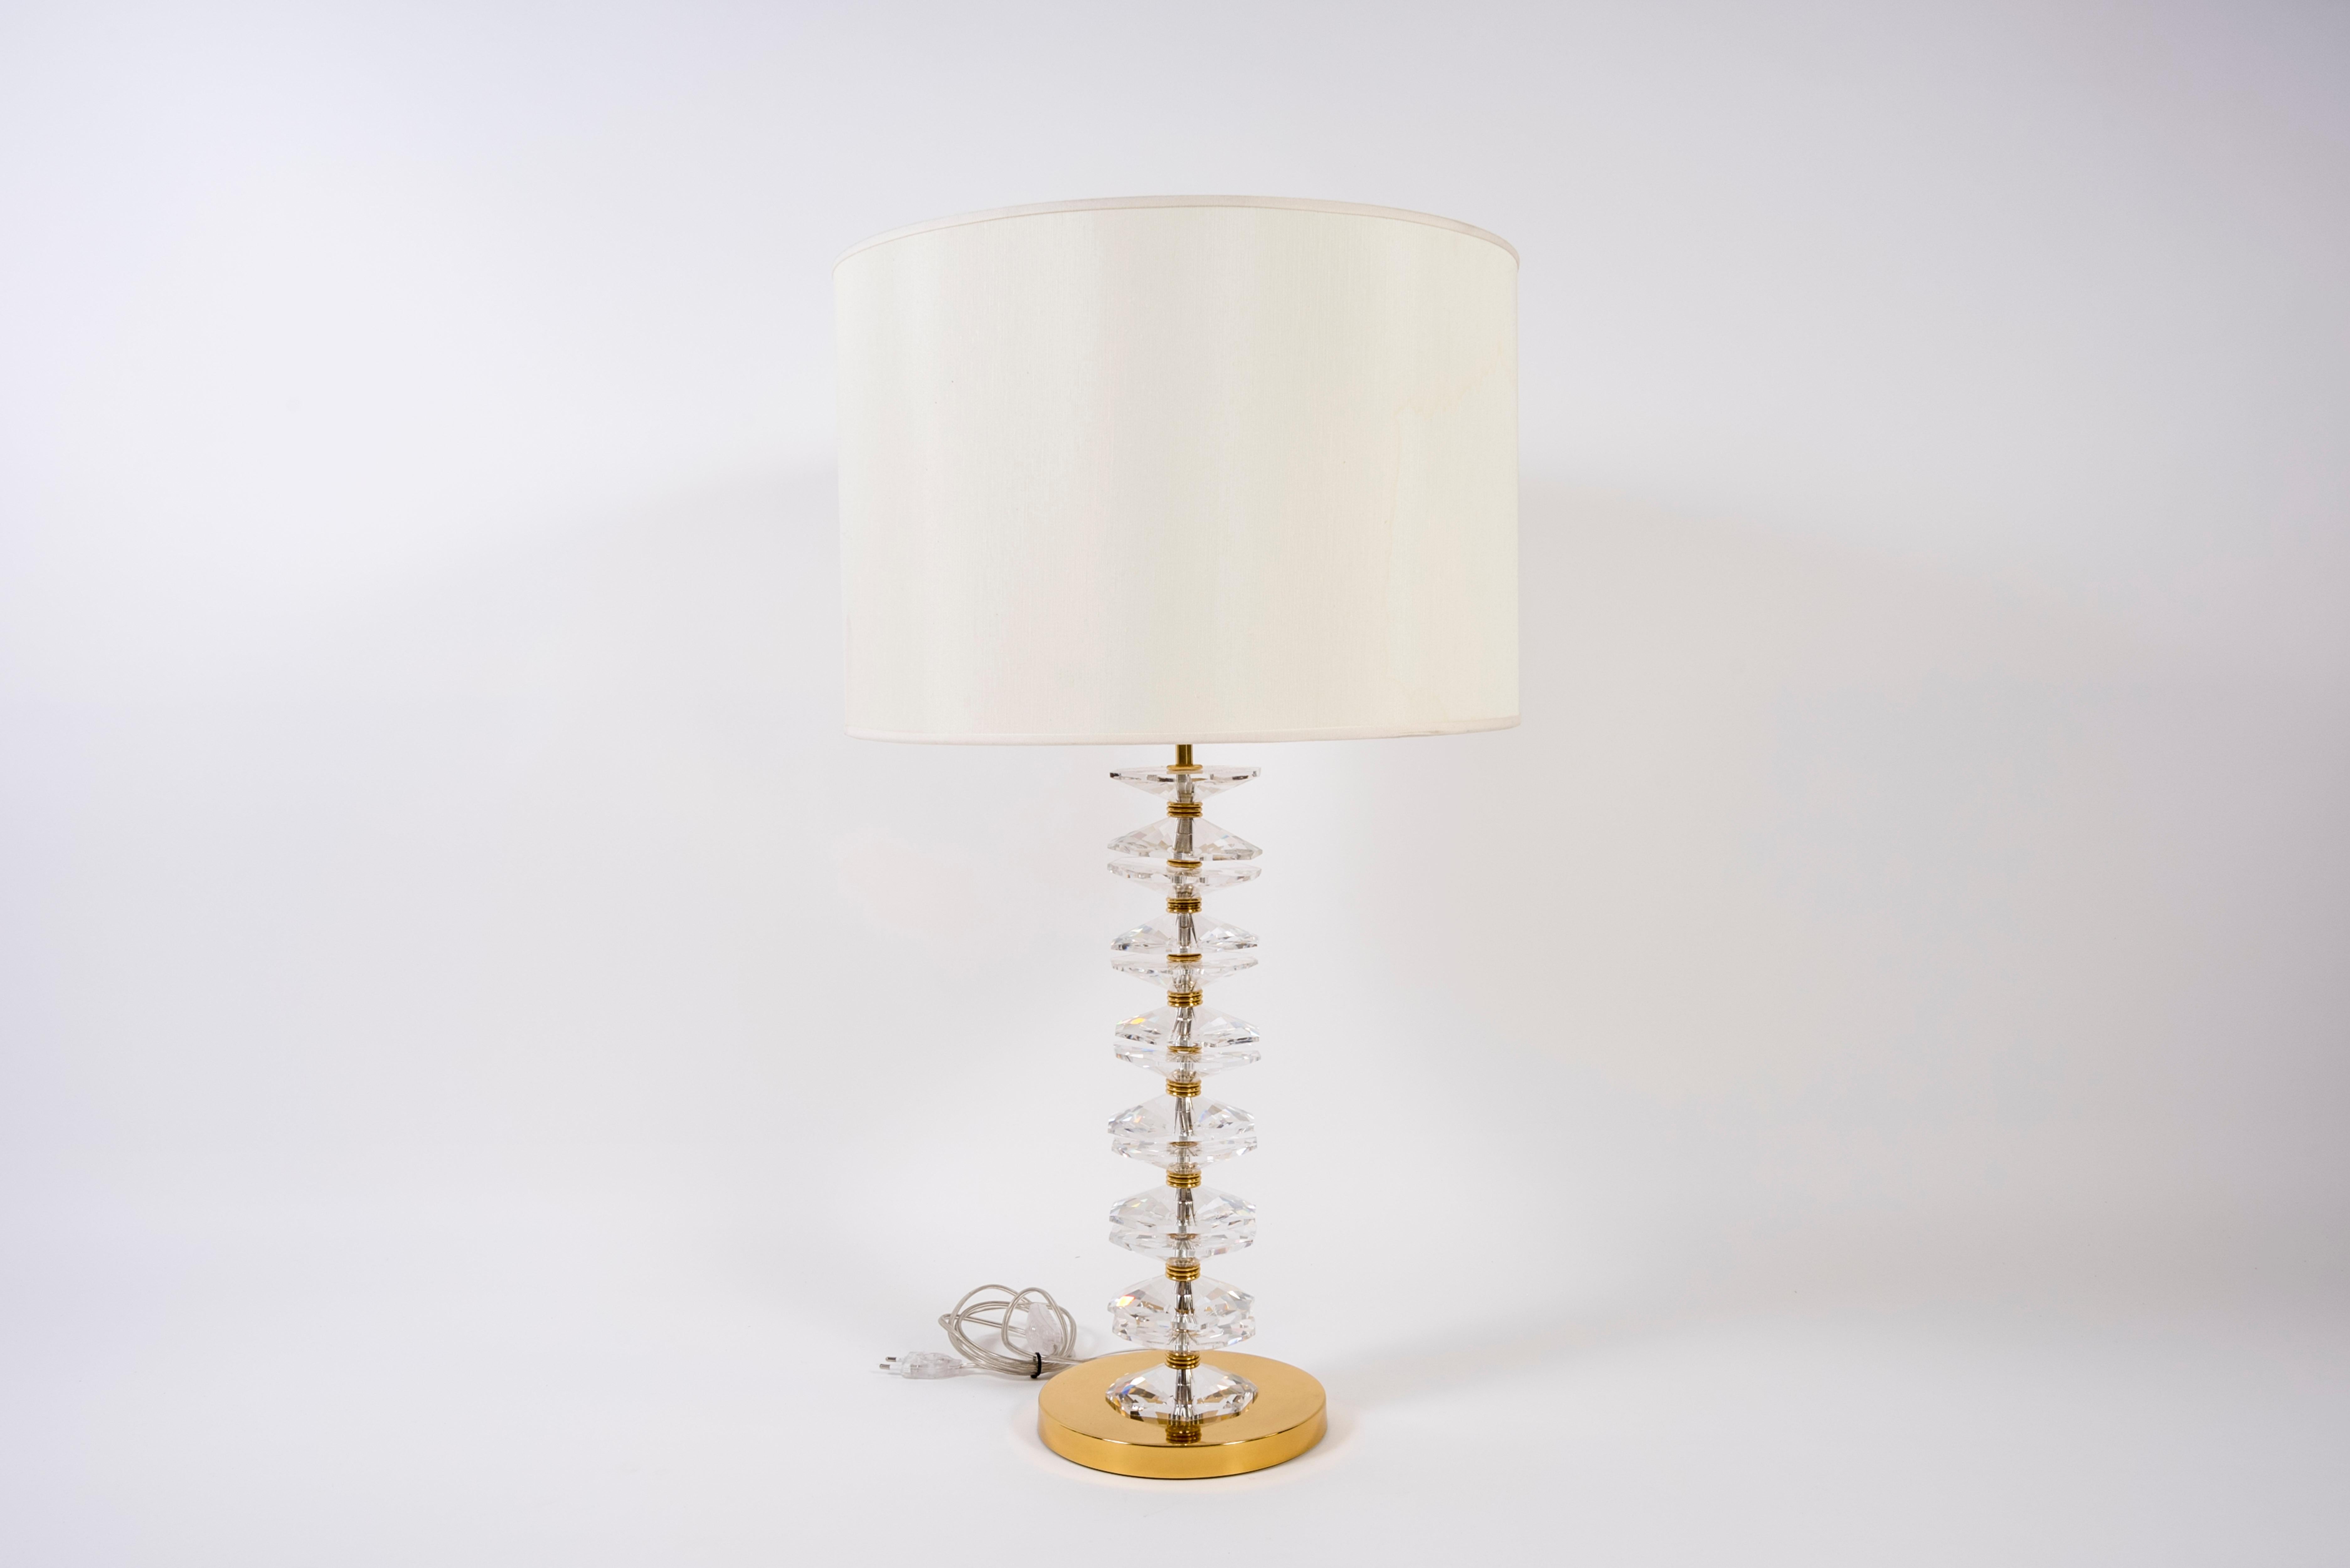 Pair of crystal table lamps in the style of Gino Cenedese
Italy
No shade included
Dimensions given without shade.